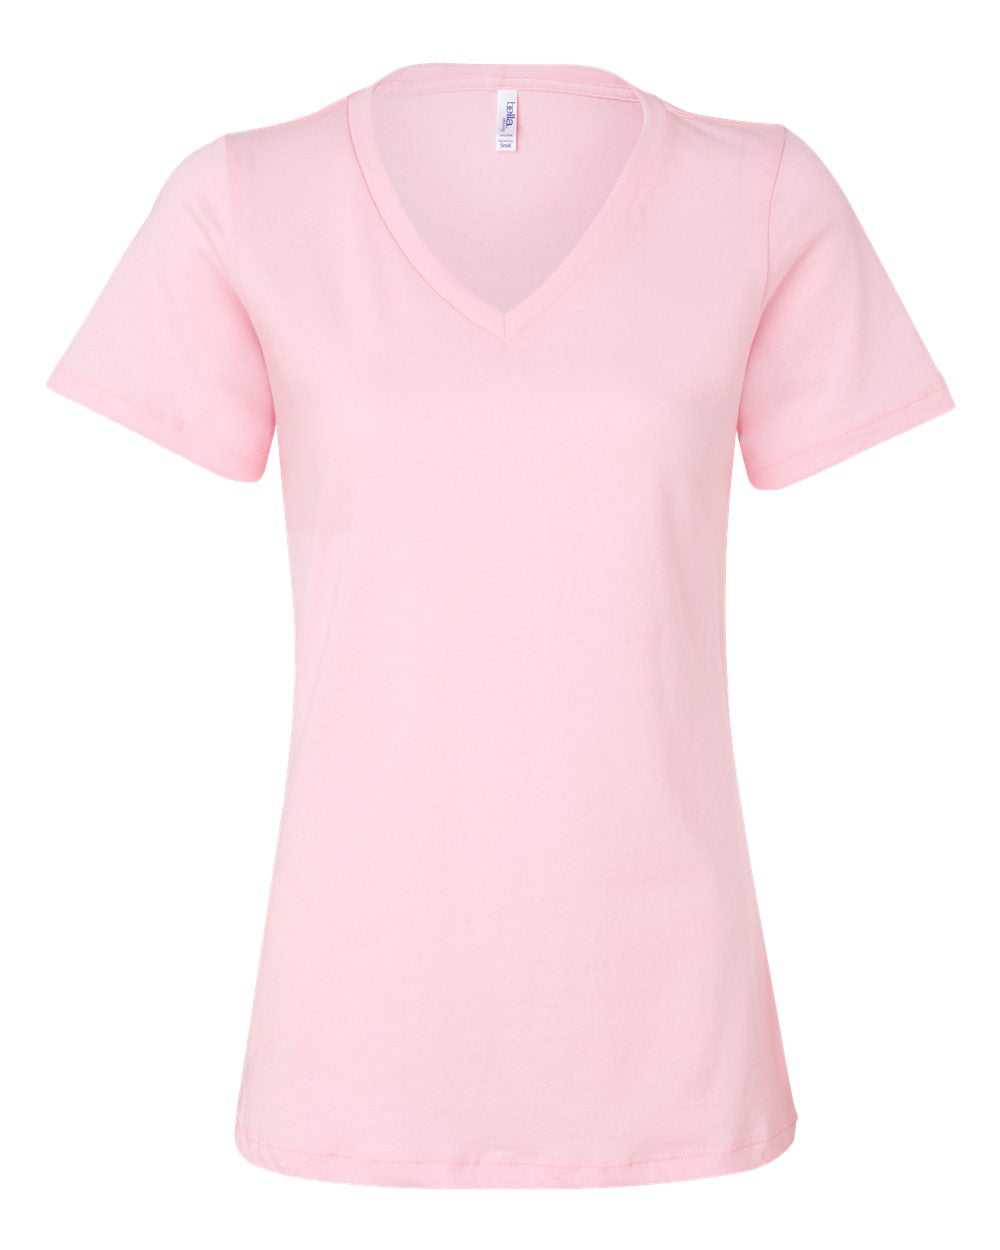 bella+canvas womens relaxed v-neck tee pink